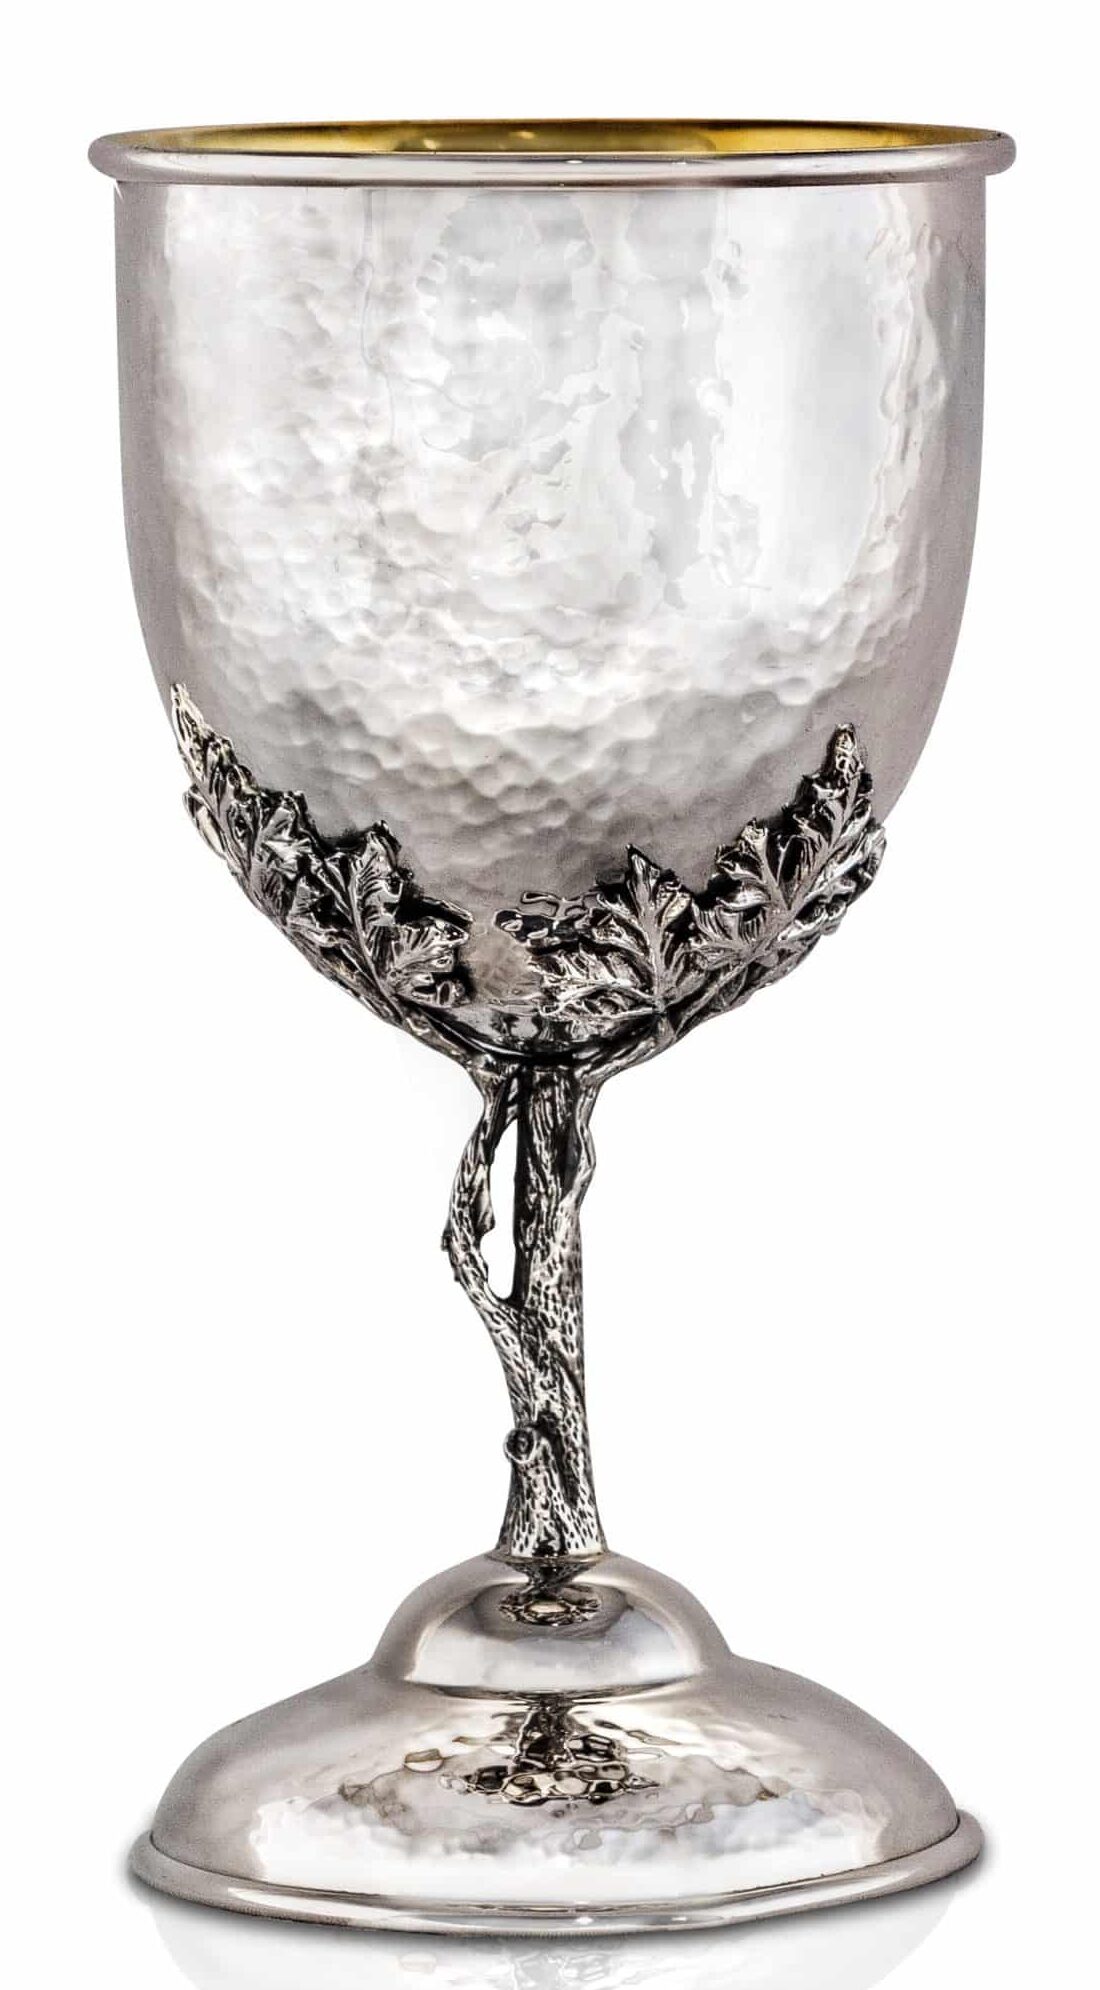 Hammered Sterling Silver Special Kiddush Cup